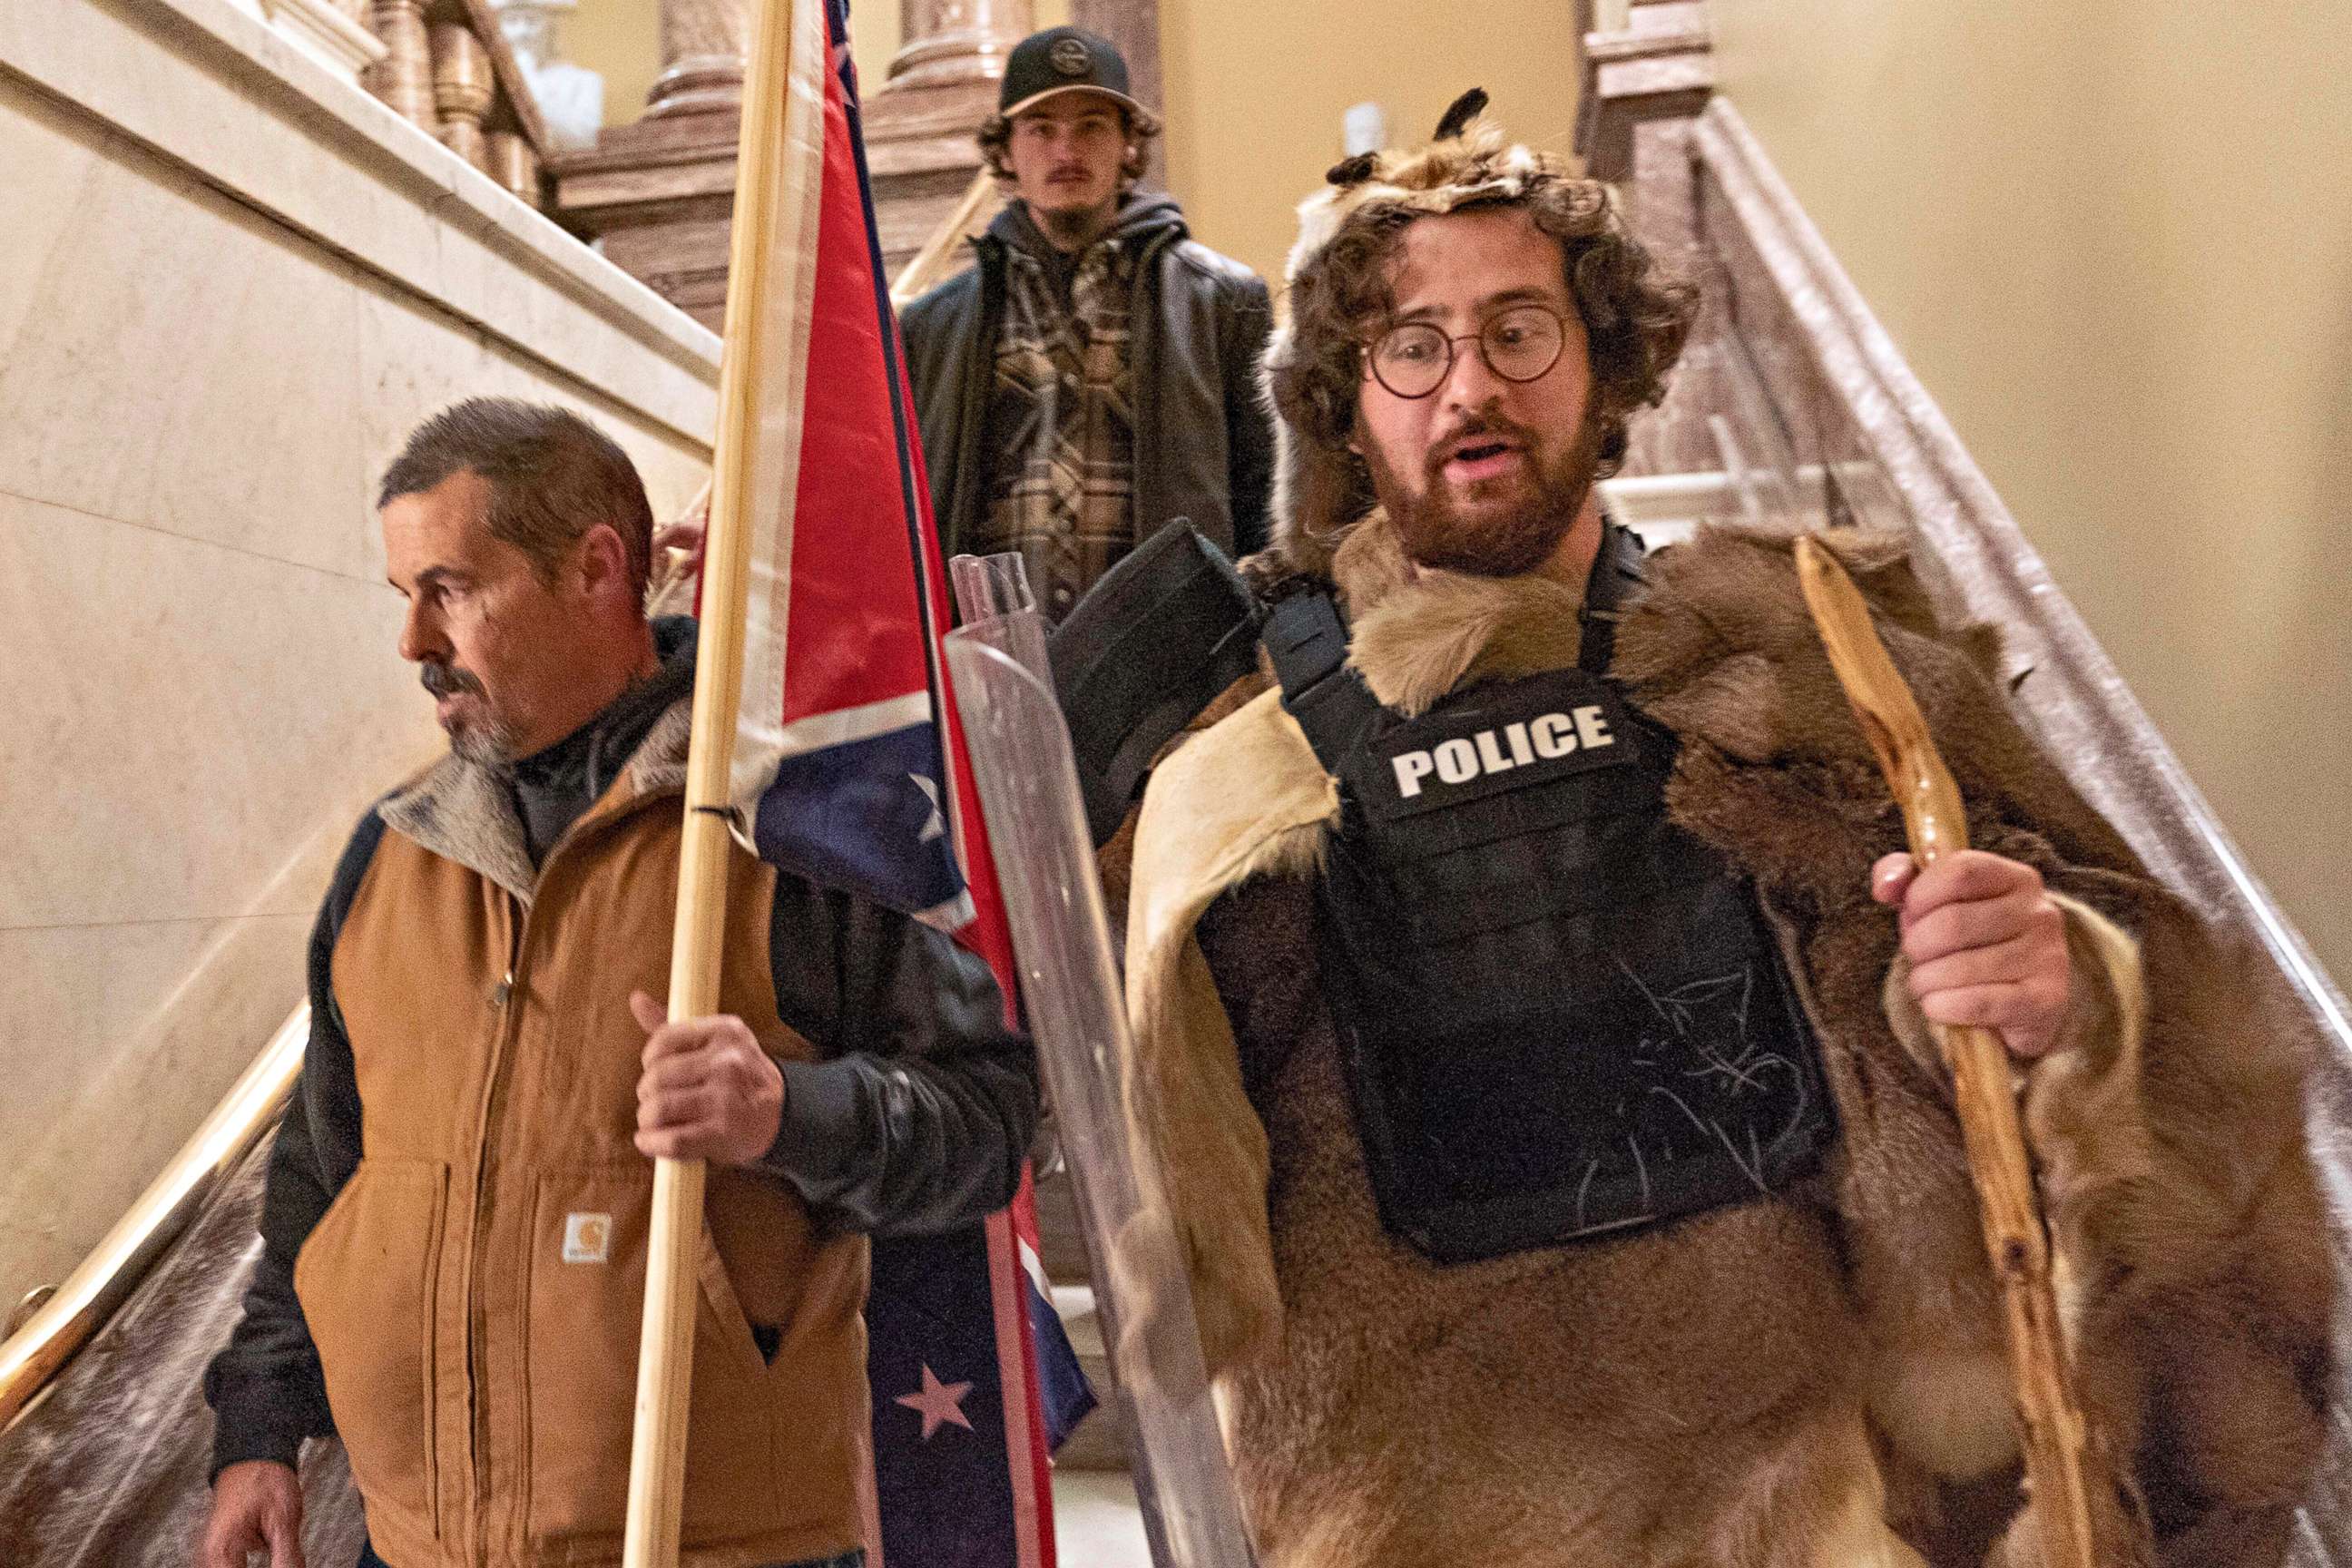 PHOTO: Supporters of President Donald Trump, including Aaron Mostofsky, right, who is identified in his arrest warrant, walk down the stairs outside the Senate Chamber in the U.S. Capitol, in Washington, Jan. 6, 2021.